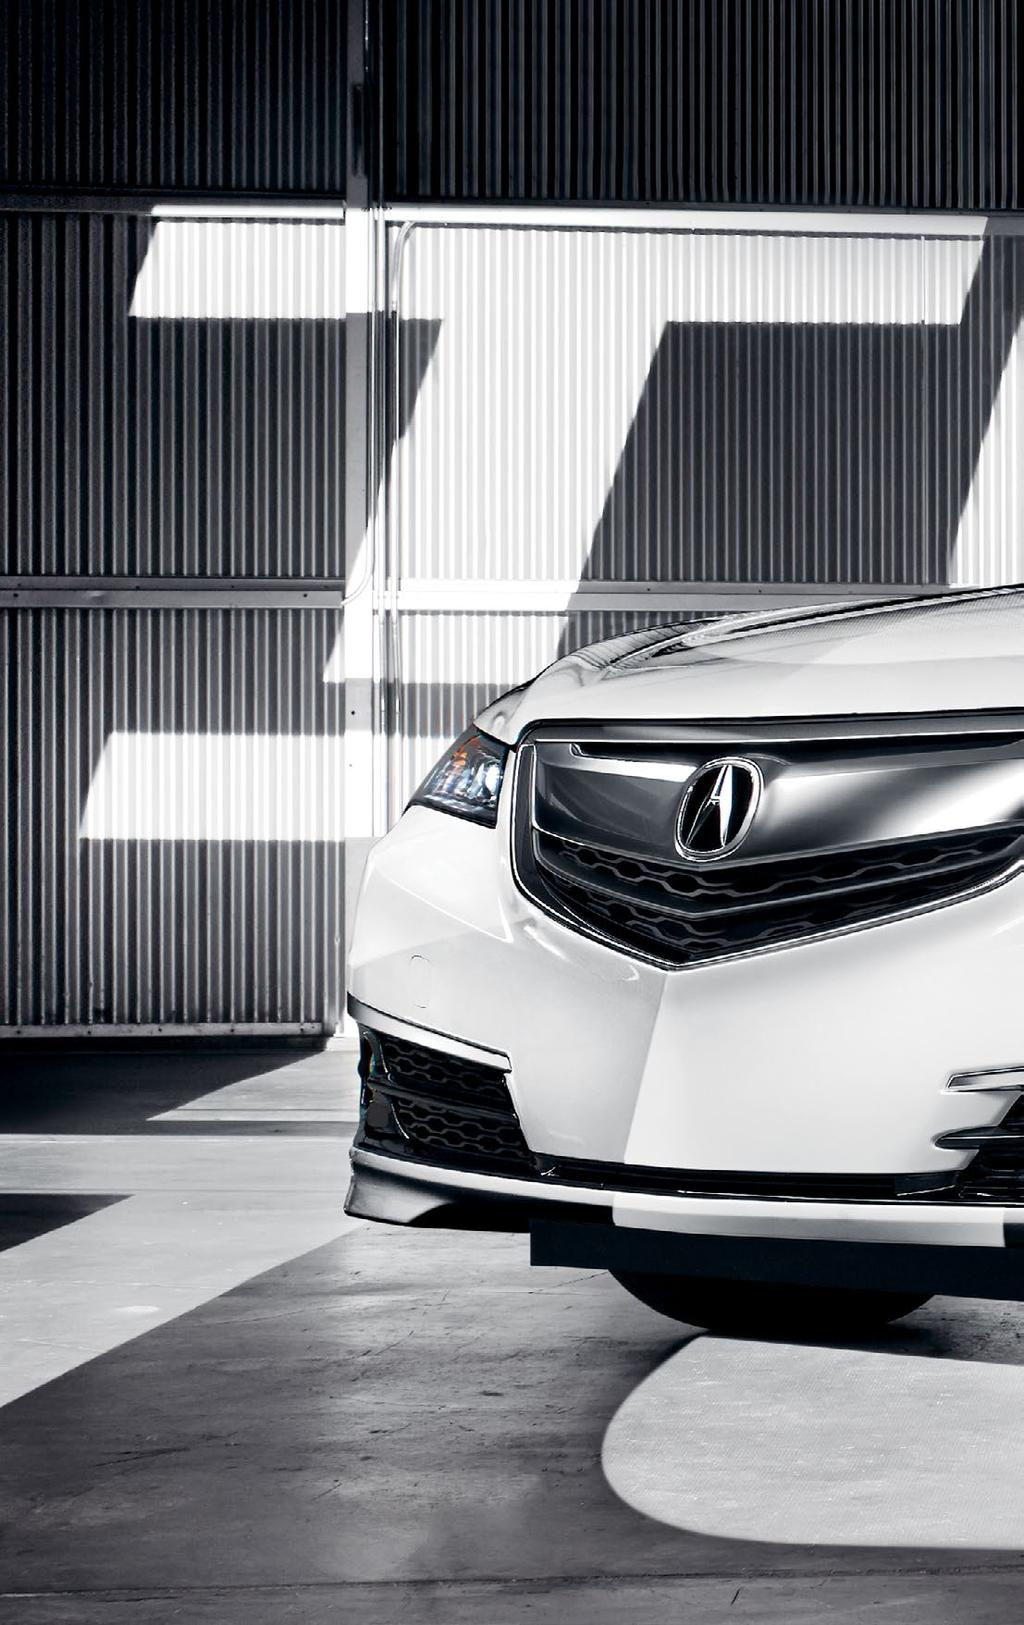 For decades we ve built performance sedans with unwavering purpose and passion. The All-New 2015 TLX represents more than the latest evolution.